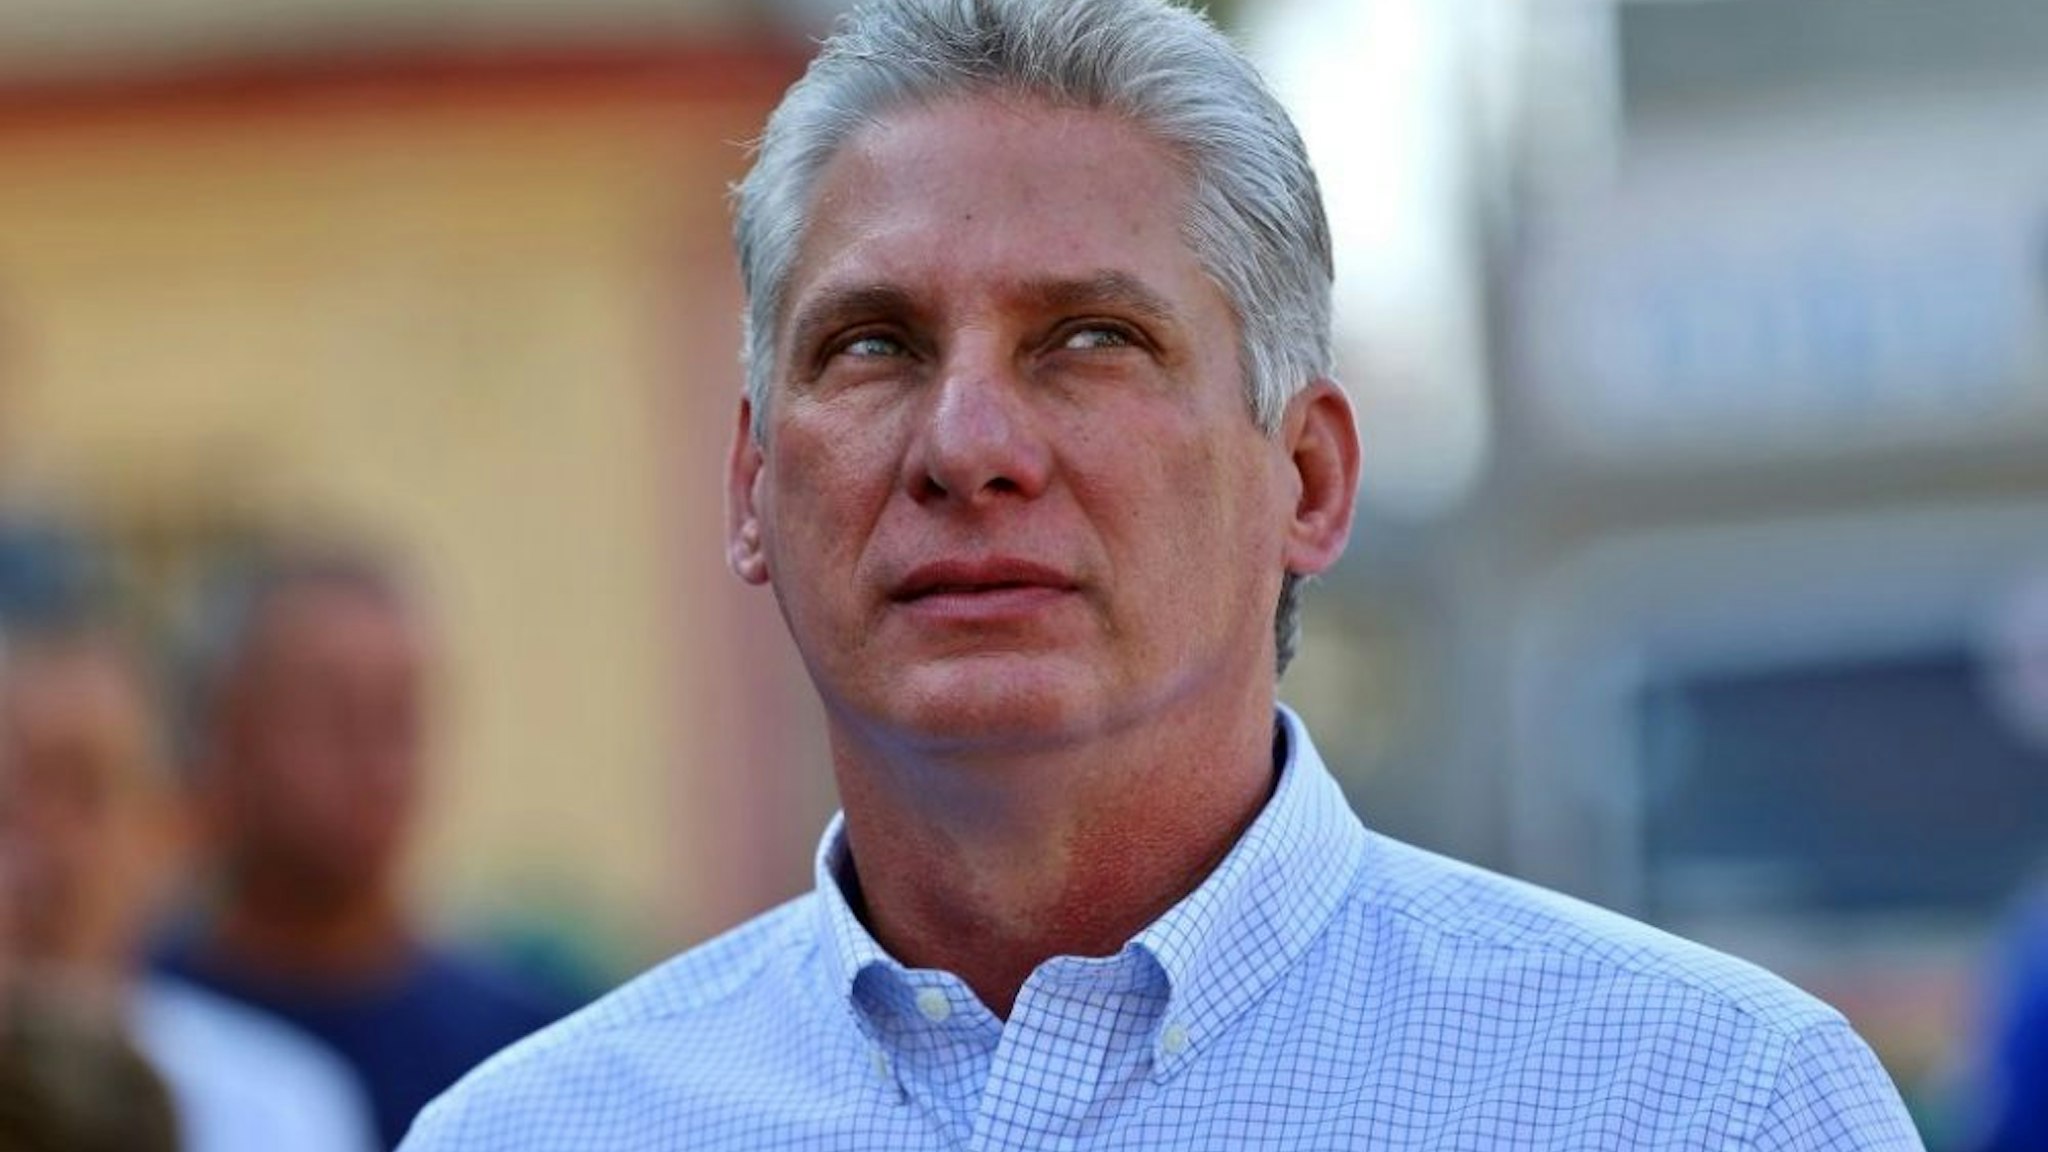 Cuba's First Vice-President Miguel Diaz-Canel queues at a polling station in Santa Clara, Cuba, during an election to ratify a new National Assembly, on March 11, 2018. - Cubans vote to ratify a new National Assembly on Sunday, a key step in a process leading to the election of a new president, the first in nearly 60 years from outside the Castro family. The new members of the National Assembly will be tasked with choosing a successor to 86-year-old President Raul Castro when he steps down next month.